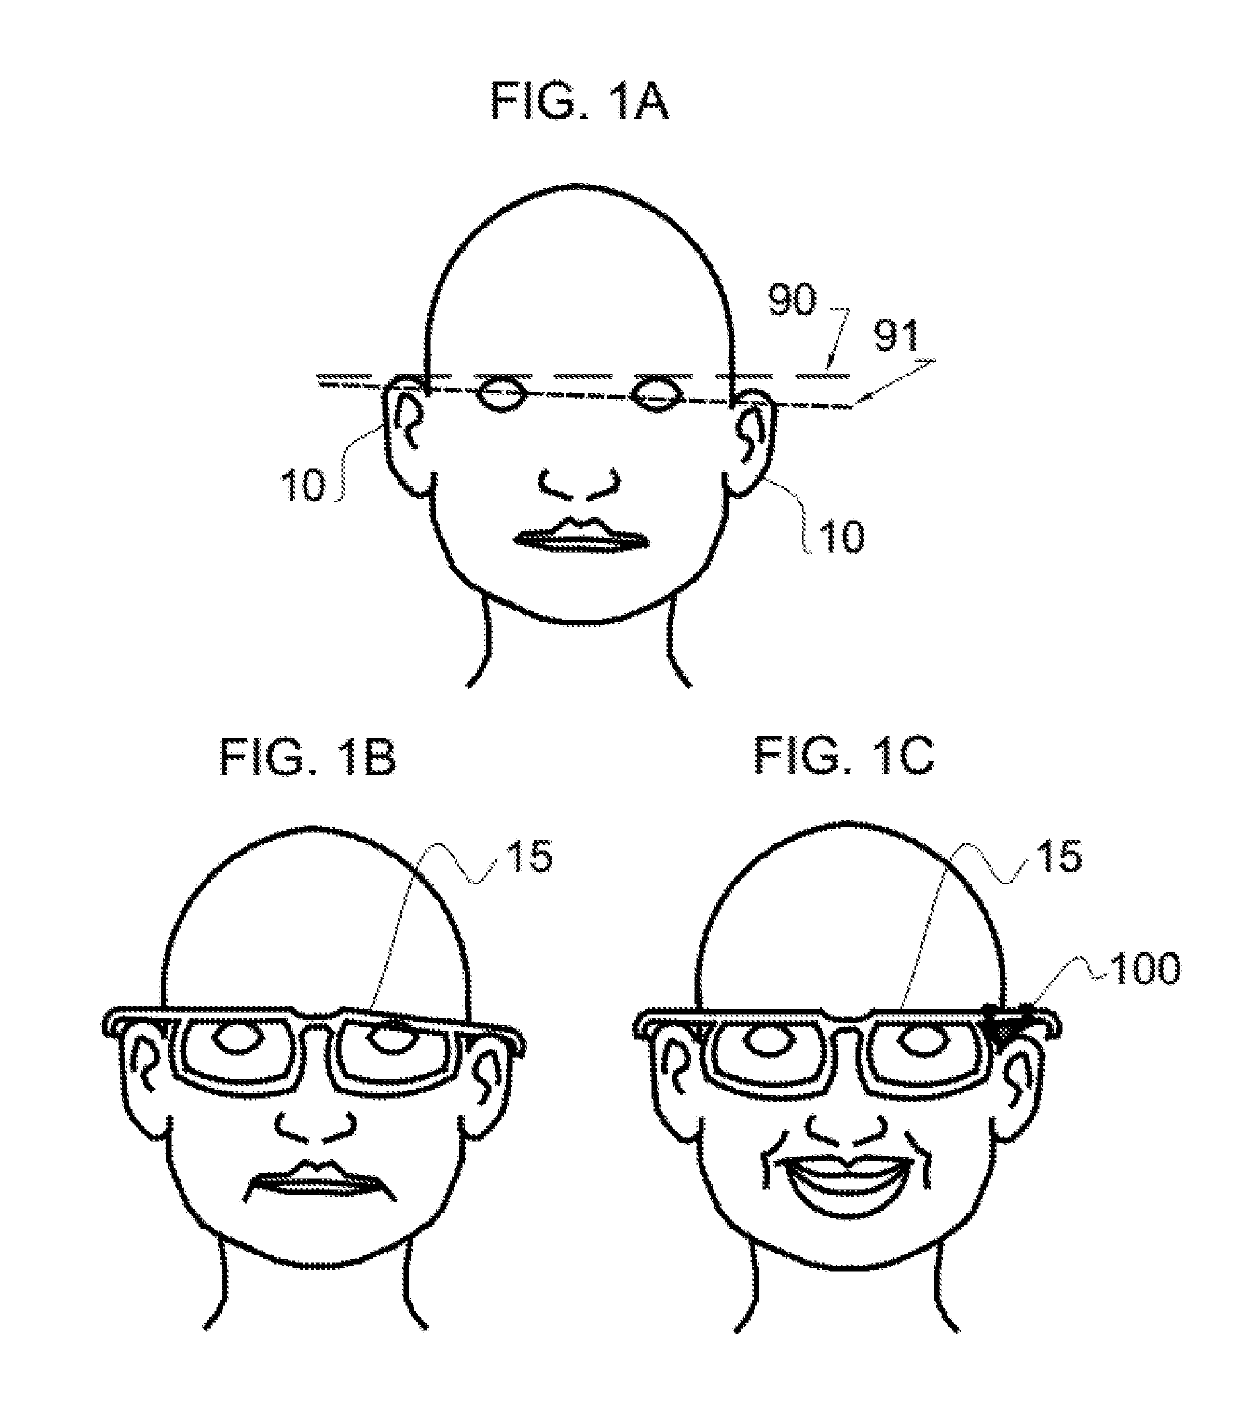 Attachment for Straightening Eyeglasses and for Holding Devices or Fashionwear